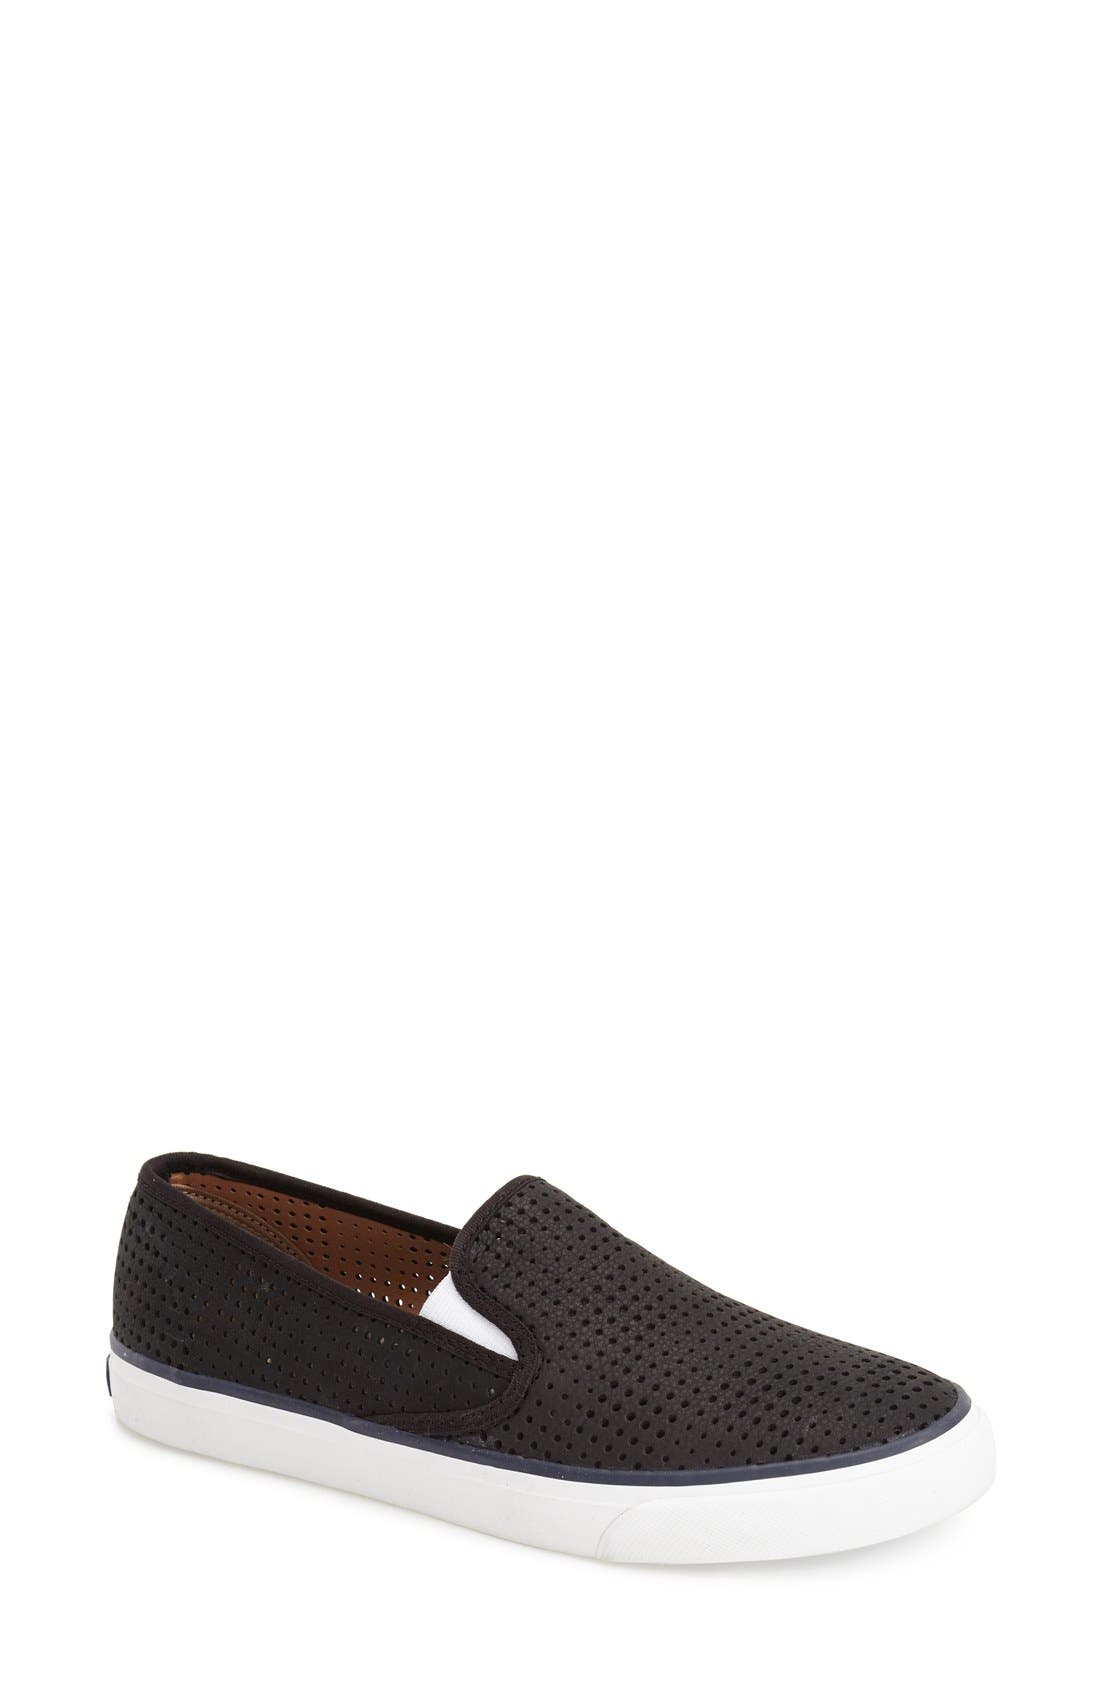 sperry perforated slip on